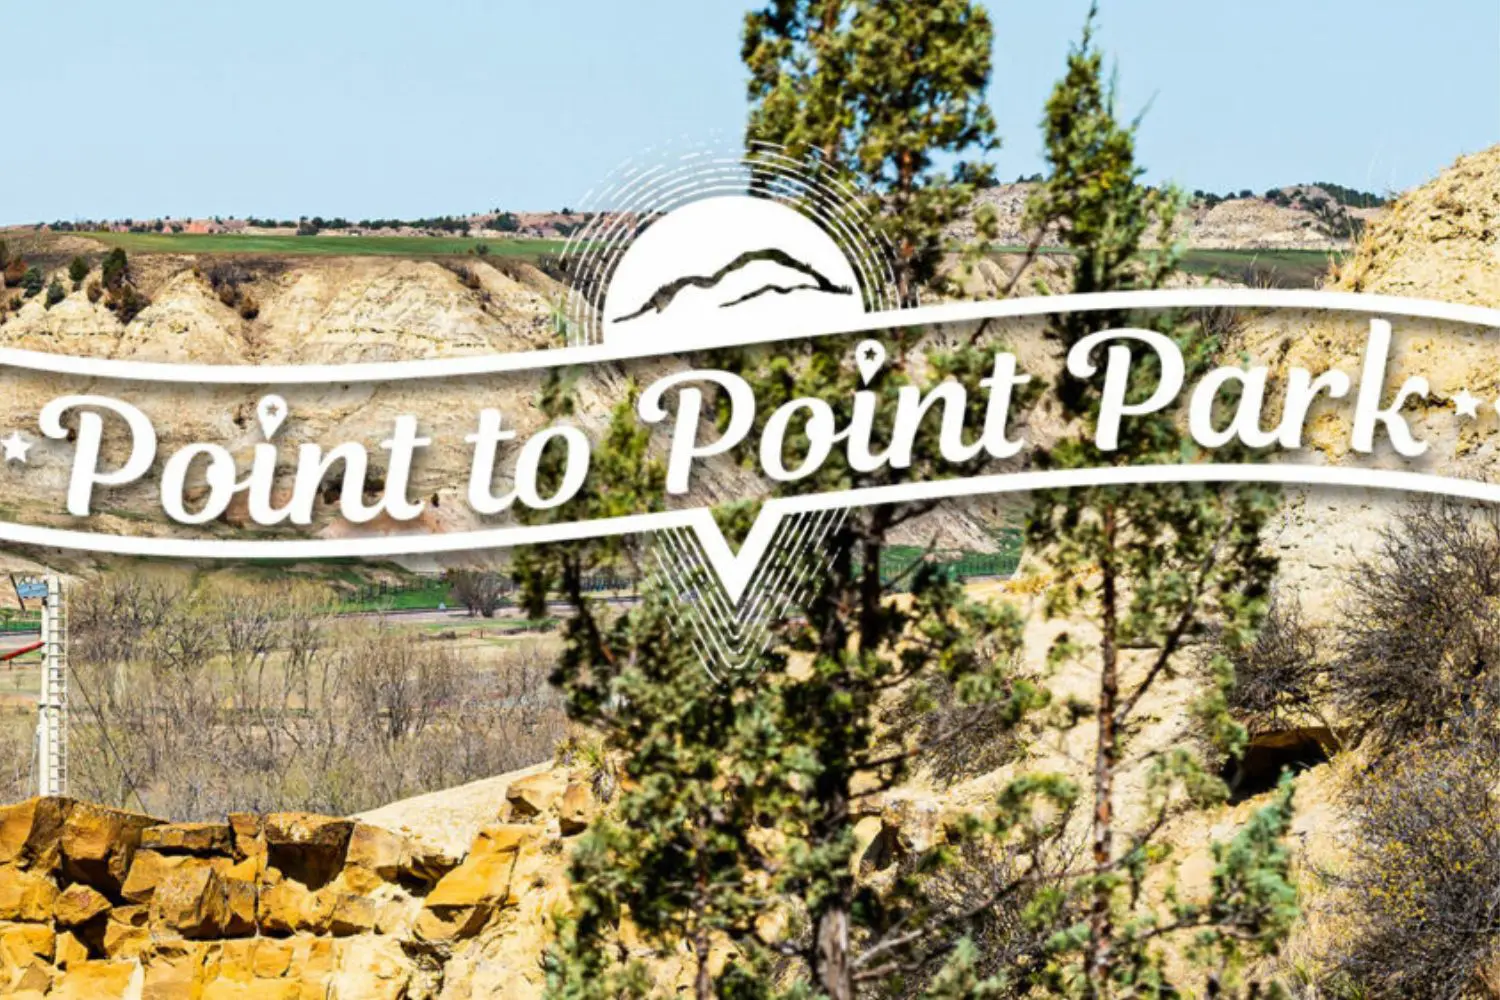 Point to Point Park